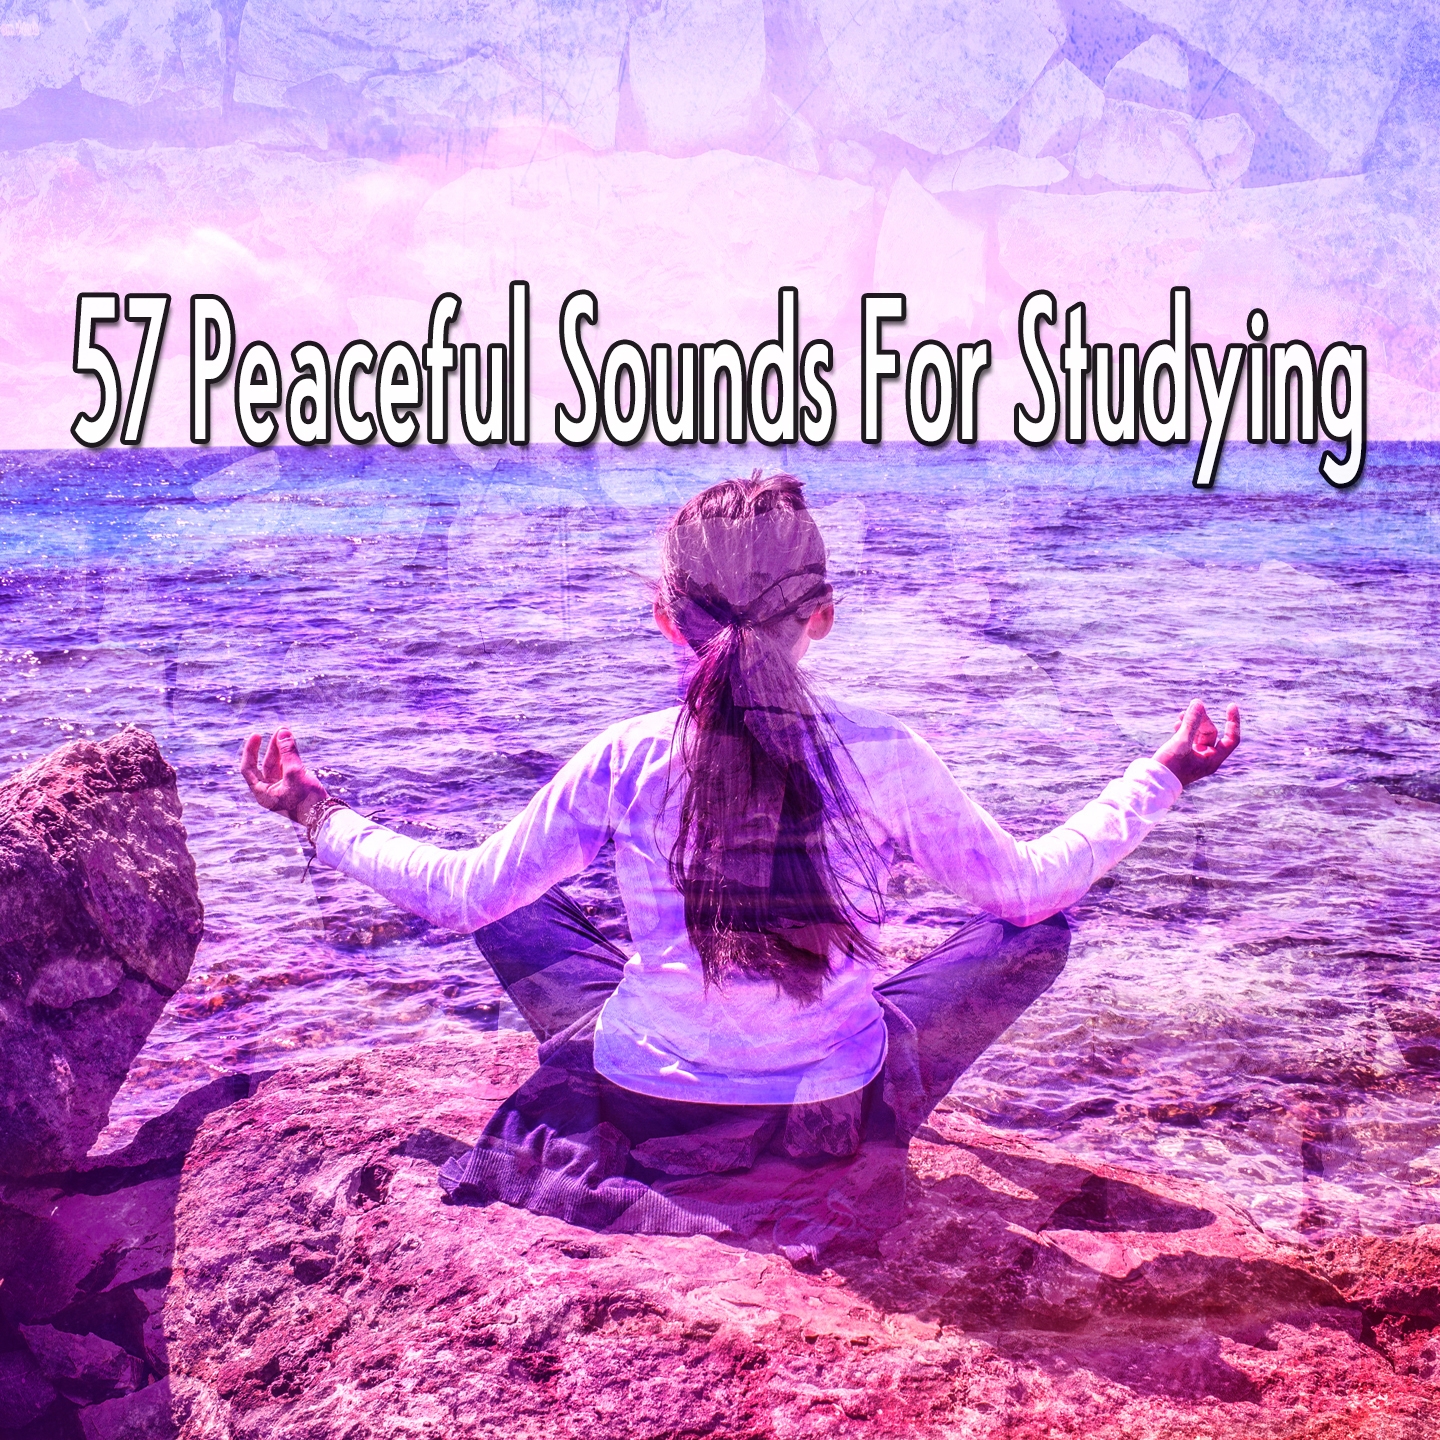 57 Peaceful Sounds For Studying